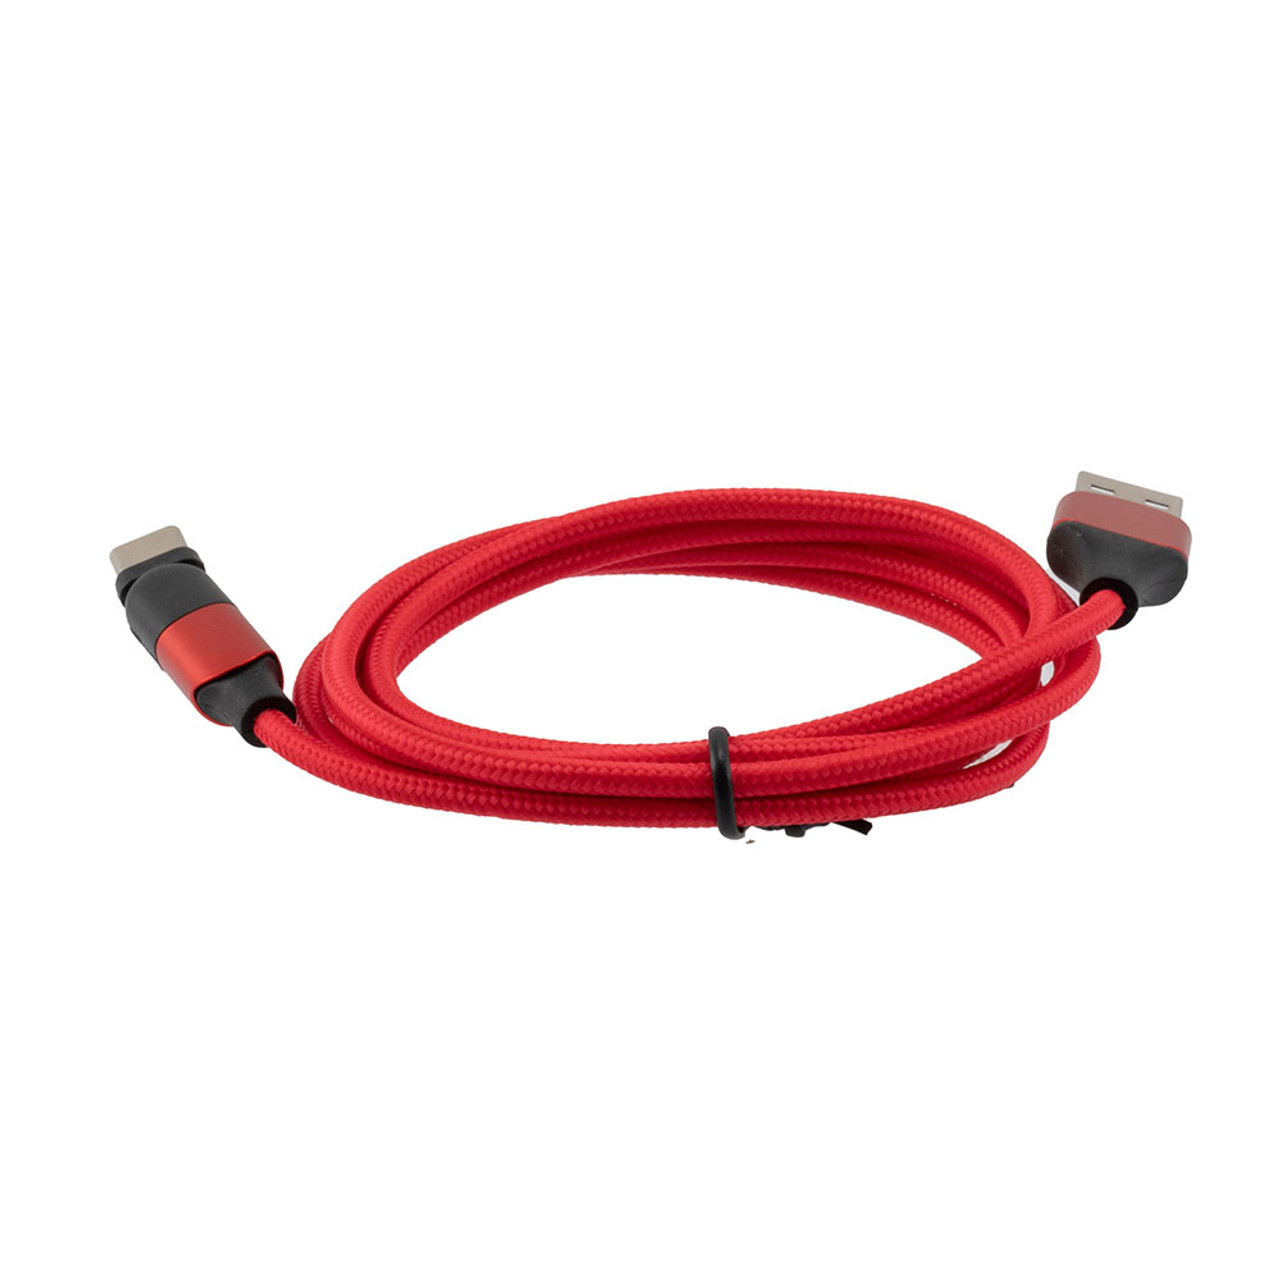 NavePoint USB 2.0 180-degree Rotating Head PVC Nylon Braided Cable, Red, USB A Male to USB C Micro Male, 2 Meter 